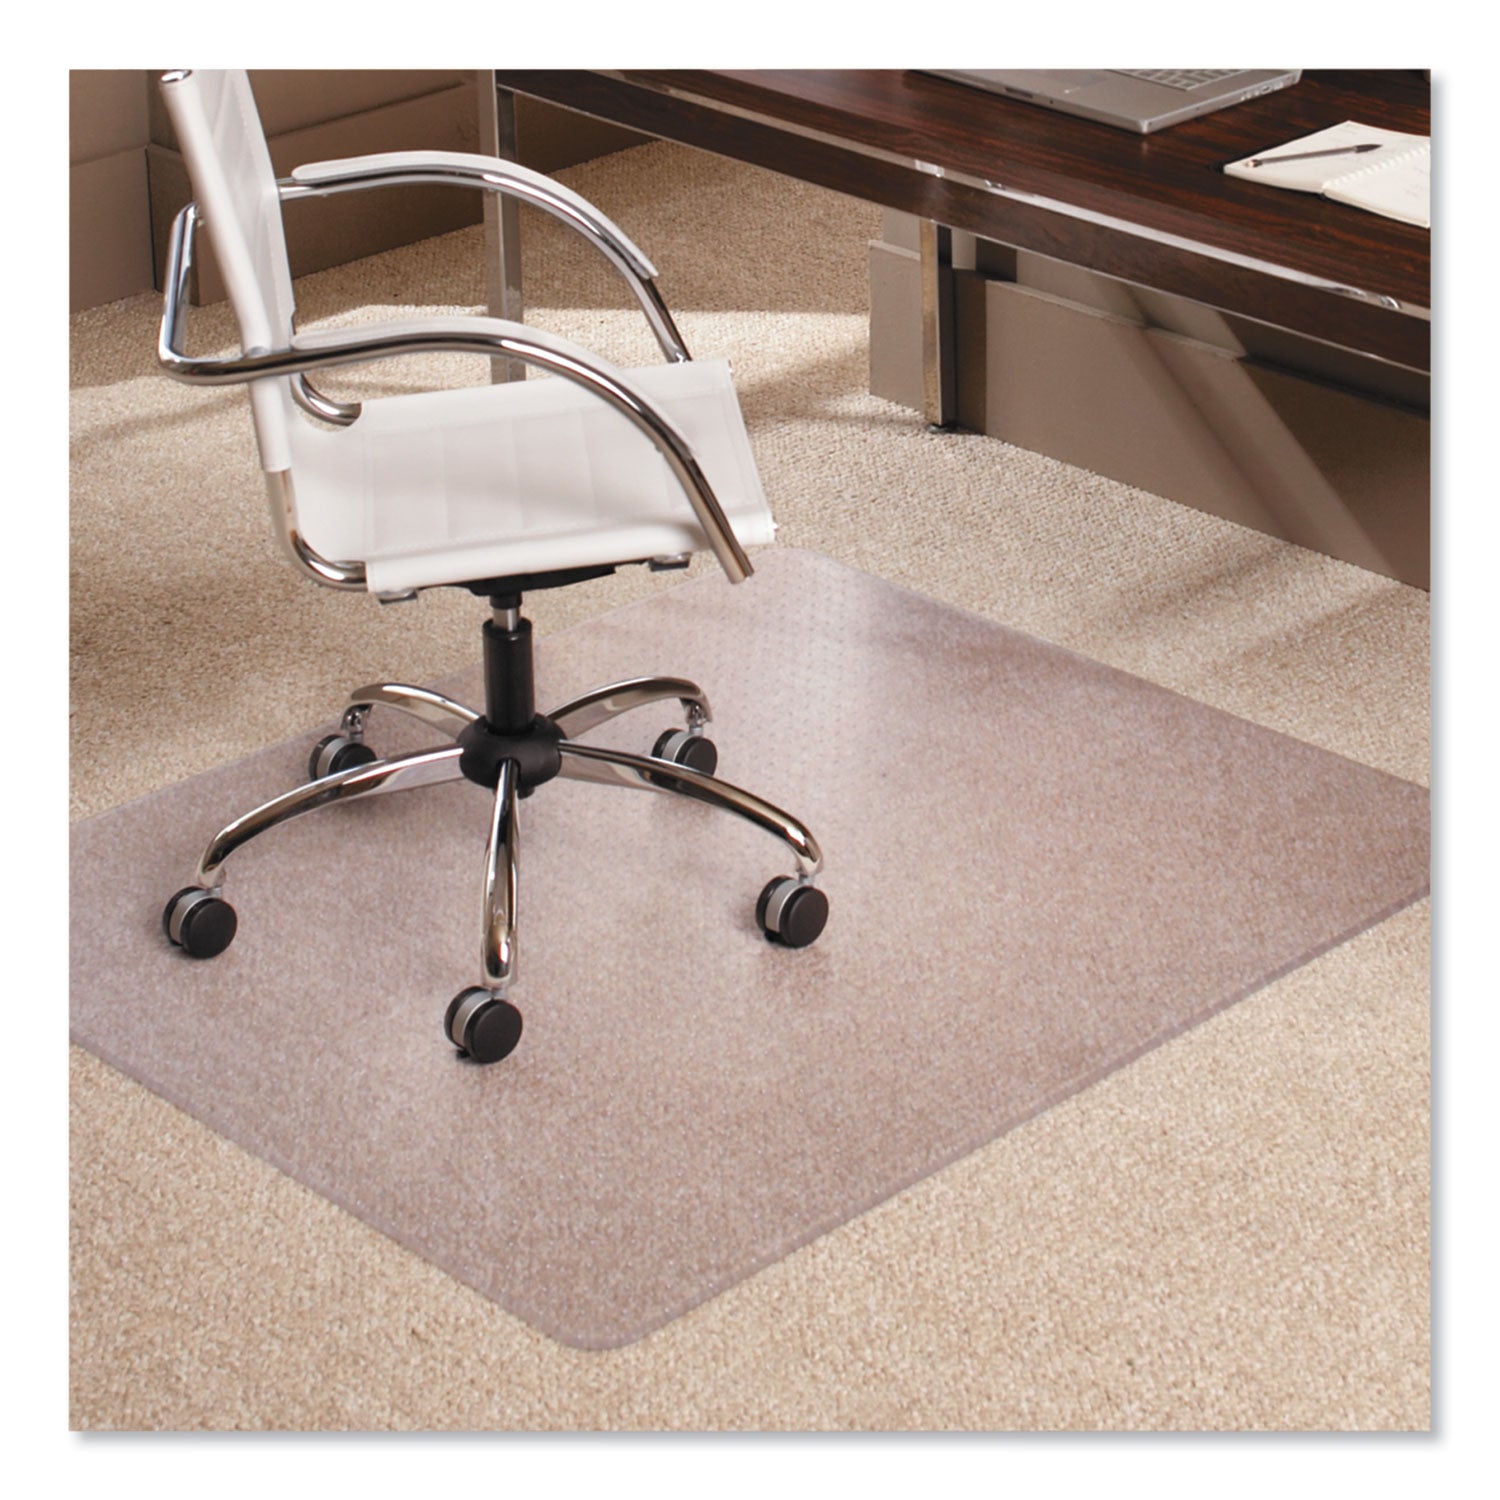 EverLife Moderate Use Chair Mat for Low Pile Carpet, Rectangular, 46 x 60, Clear - 